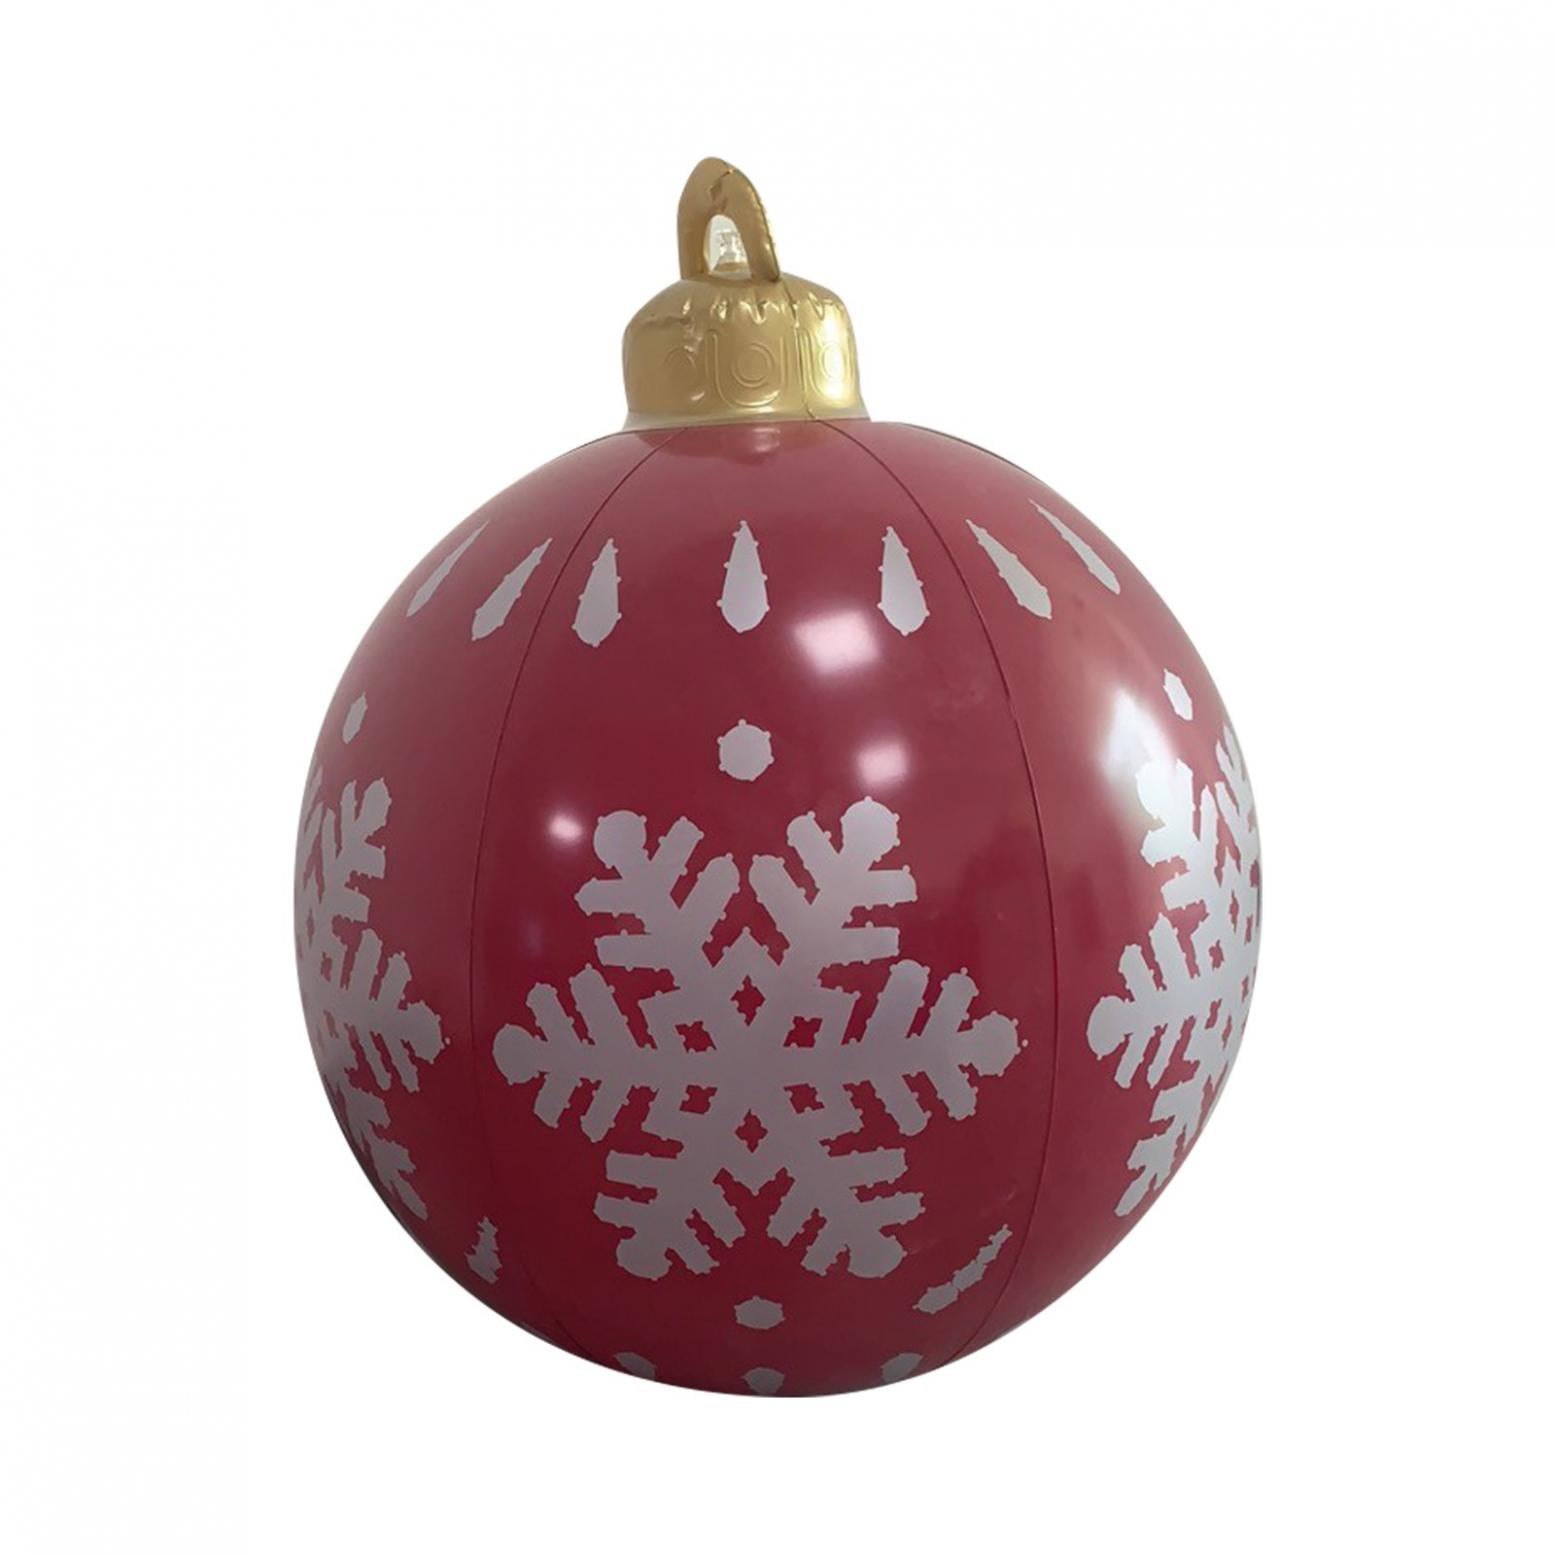 WYBF Outdoor Christmas PVC Inflatable Decorated Ball,23.7 inch Christmas Inflatable Ball Outdoor Garden Xmas Tree Decoration Ball Toy Gift 04 